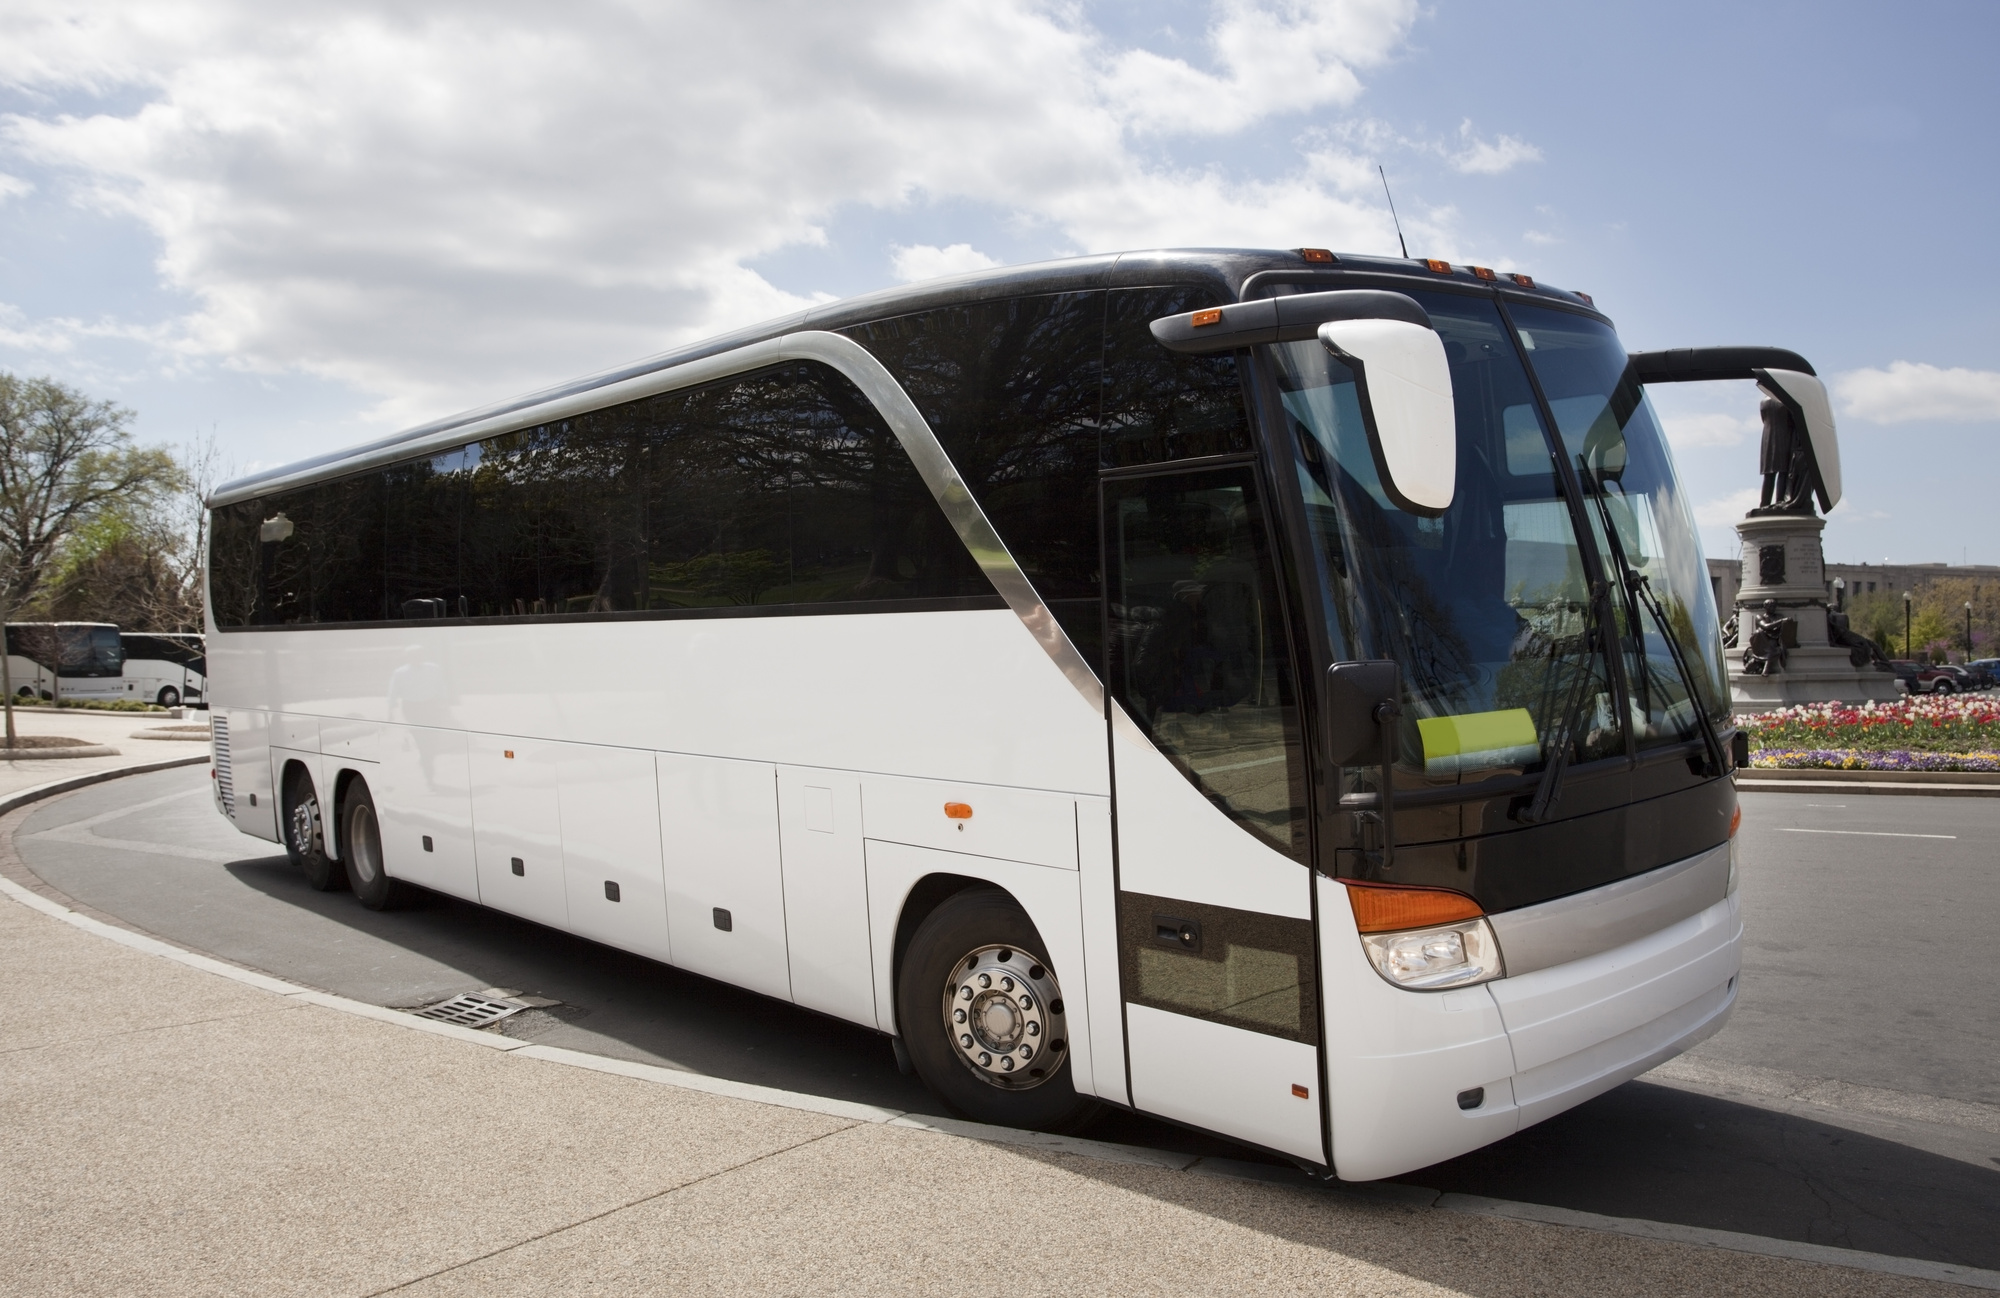 Why Look for The Best Party Bus Rental Near Me?